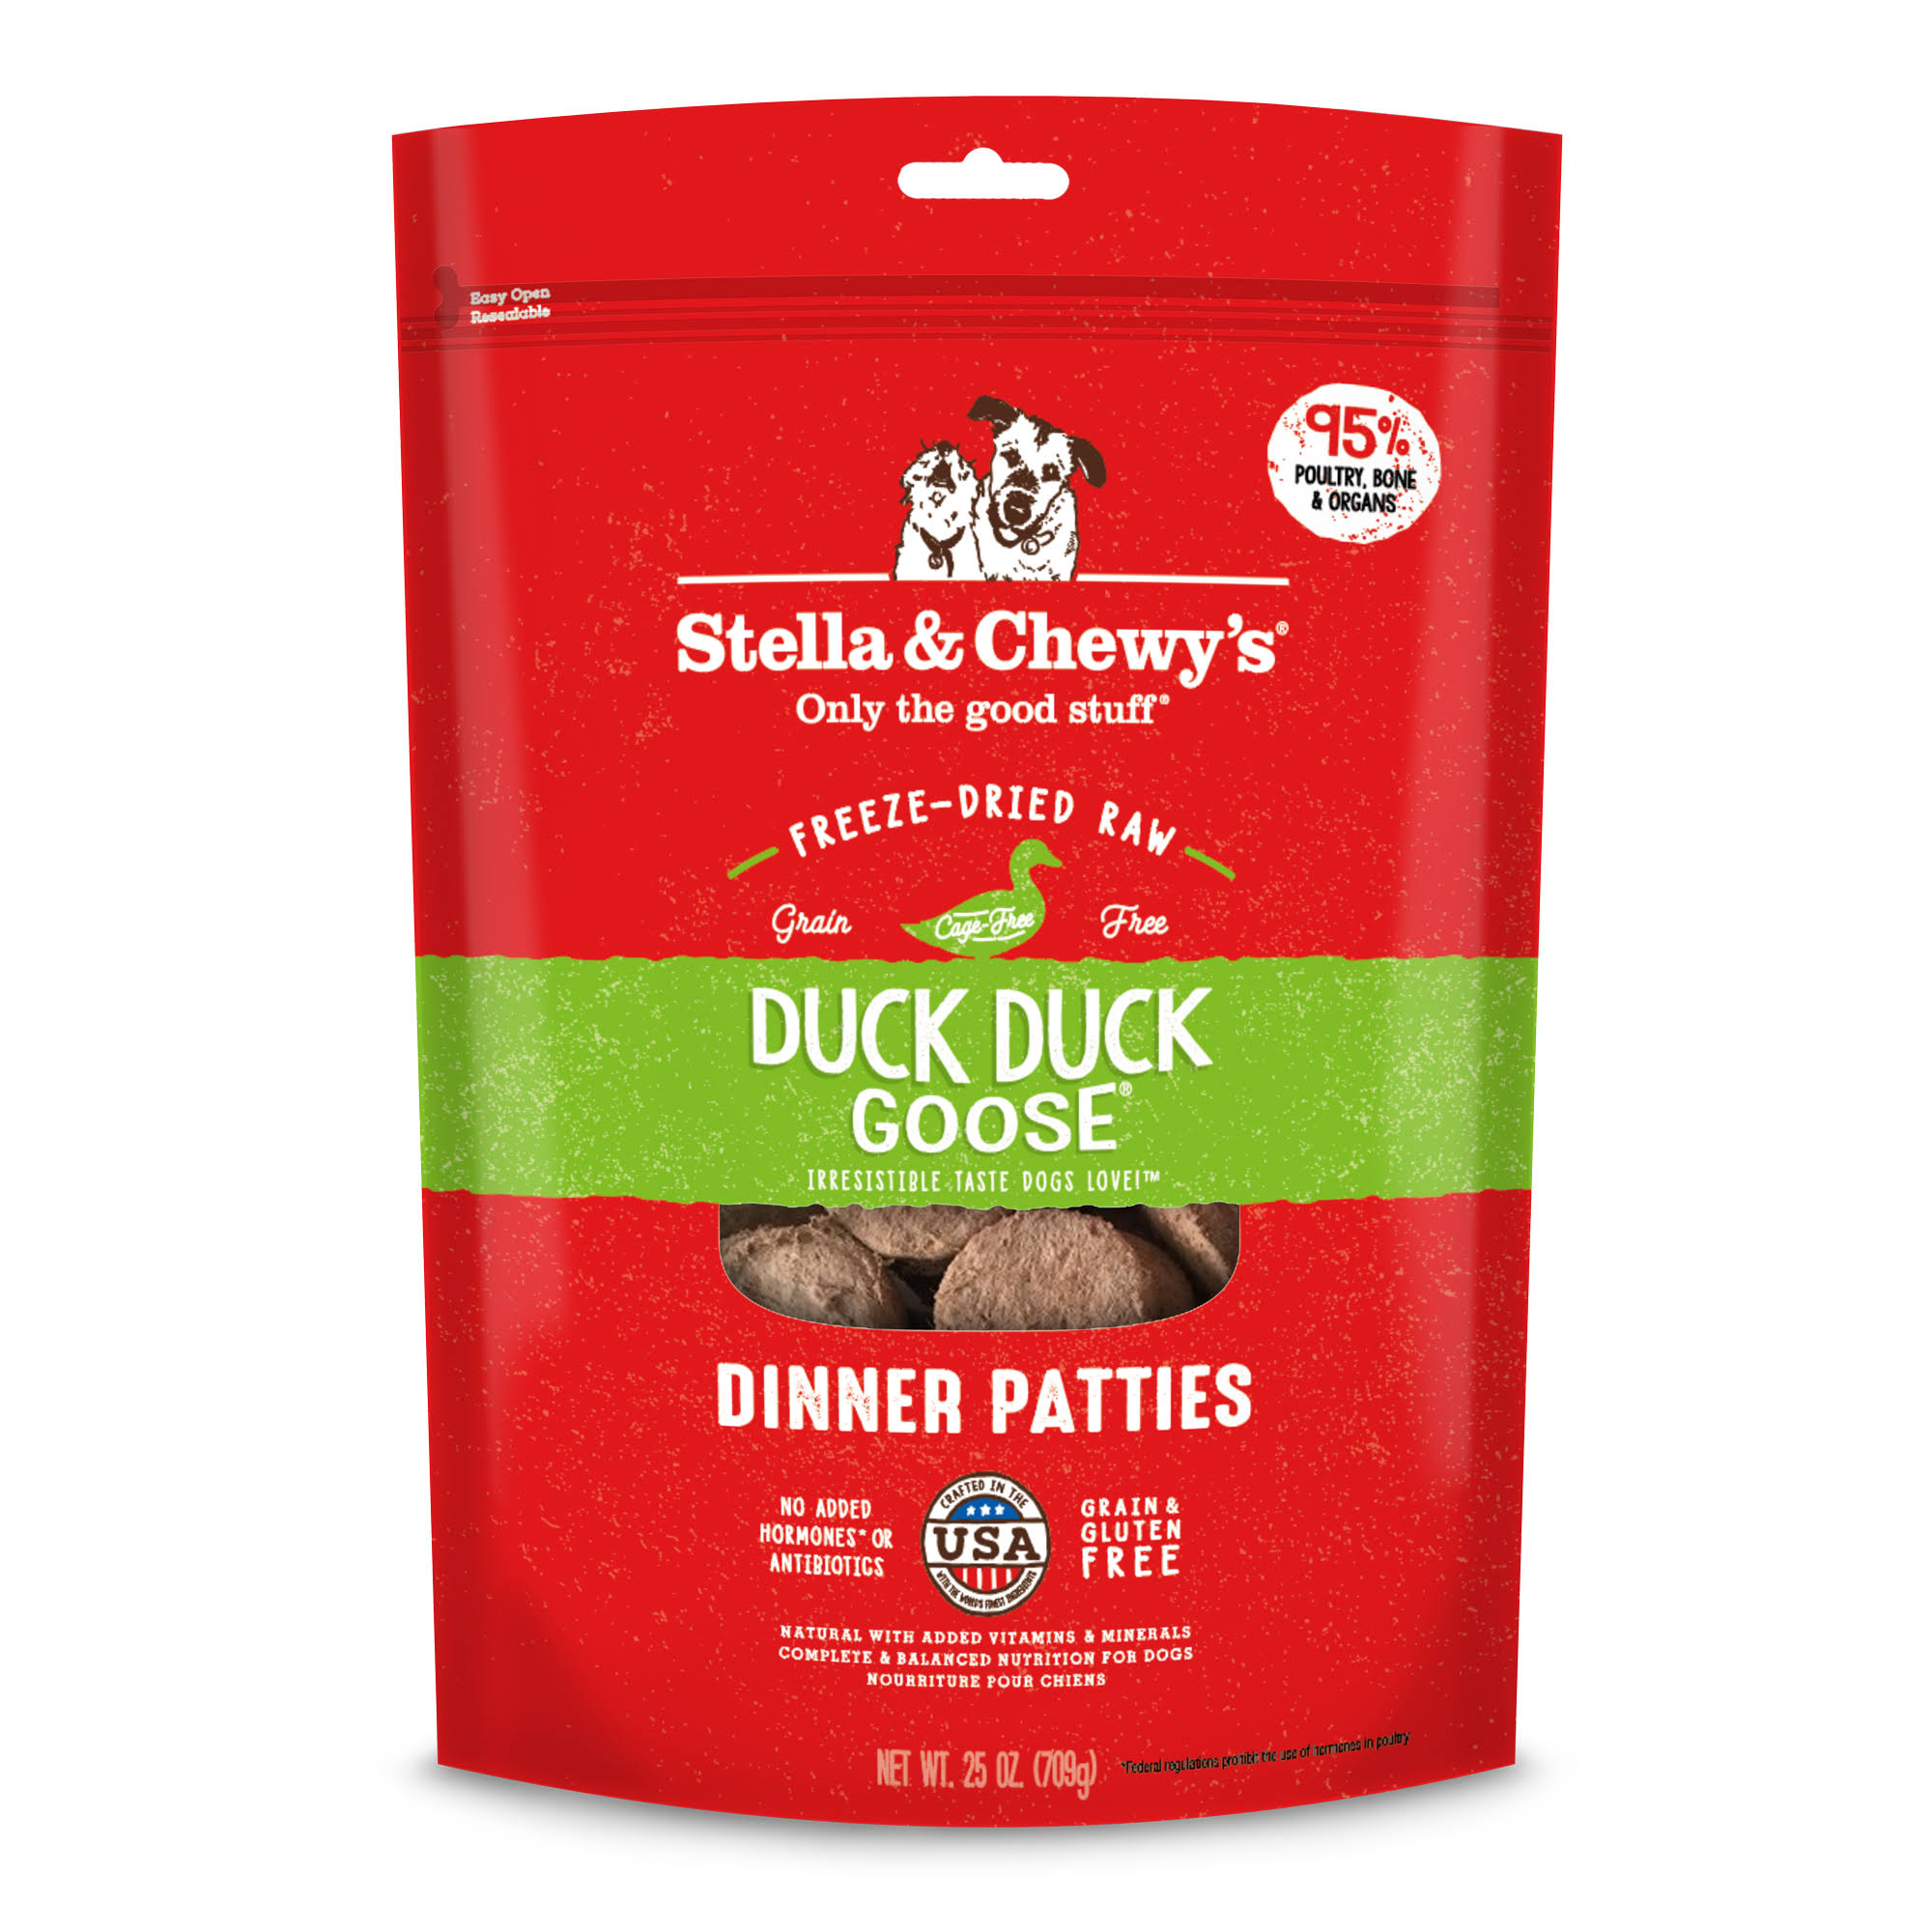 Stella and Chewy's Dog Food - Duck Duck Goose Dinner Patties, 15oz